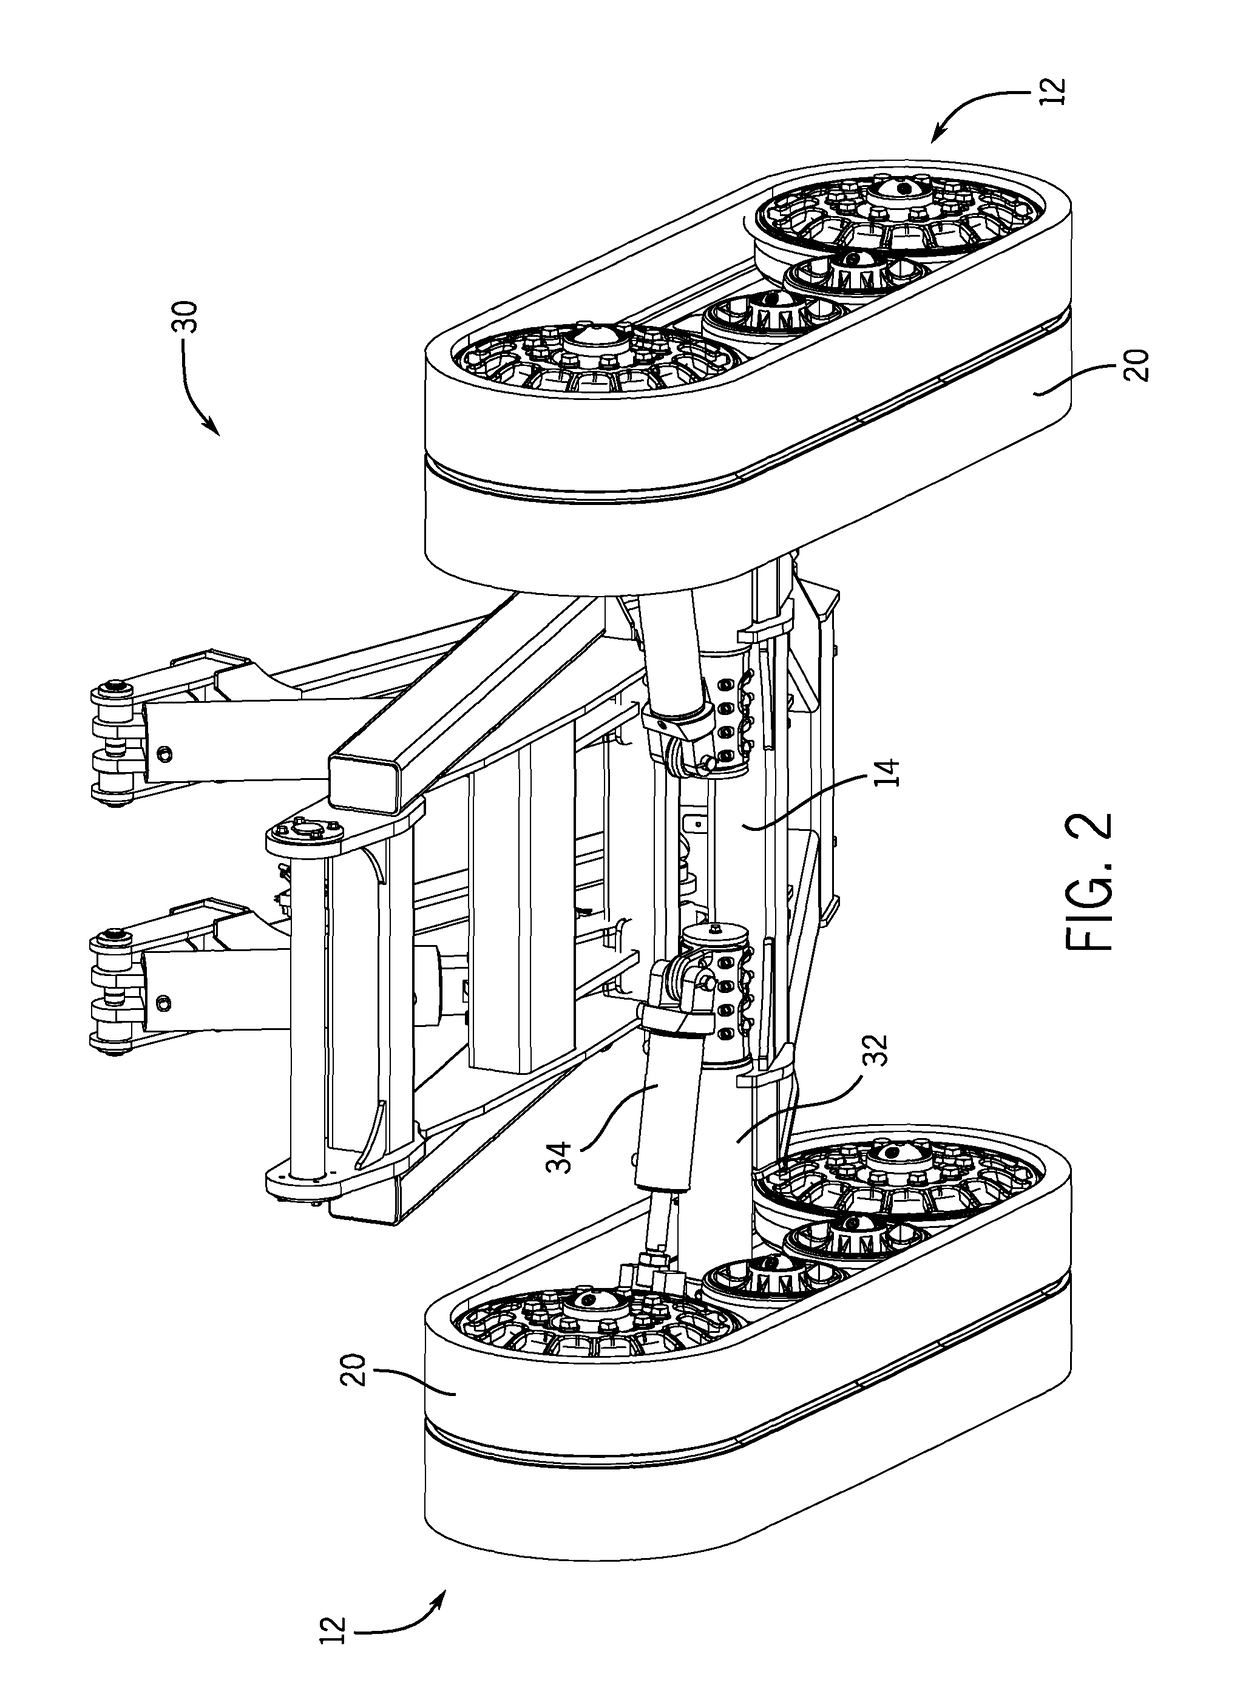 Implement steerable track assembly with pivoting steering actuator